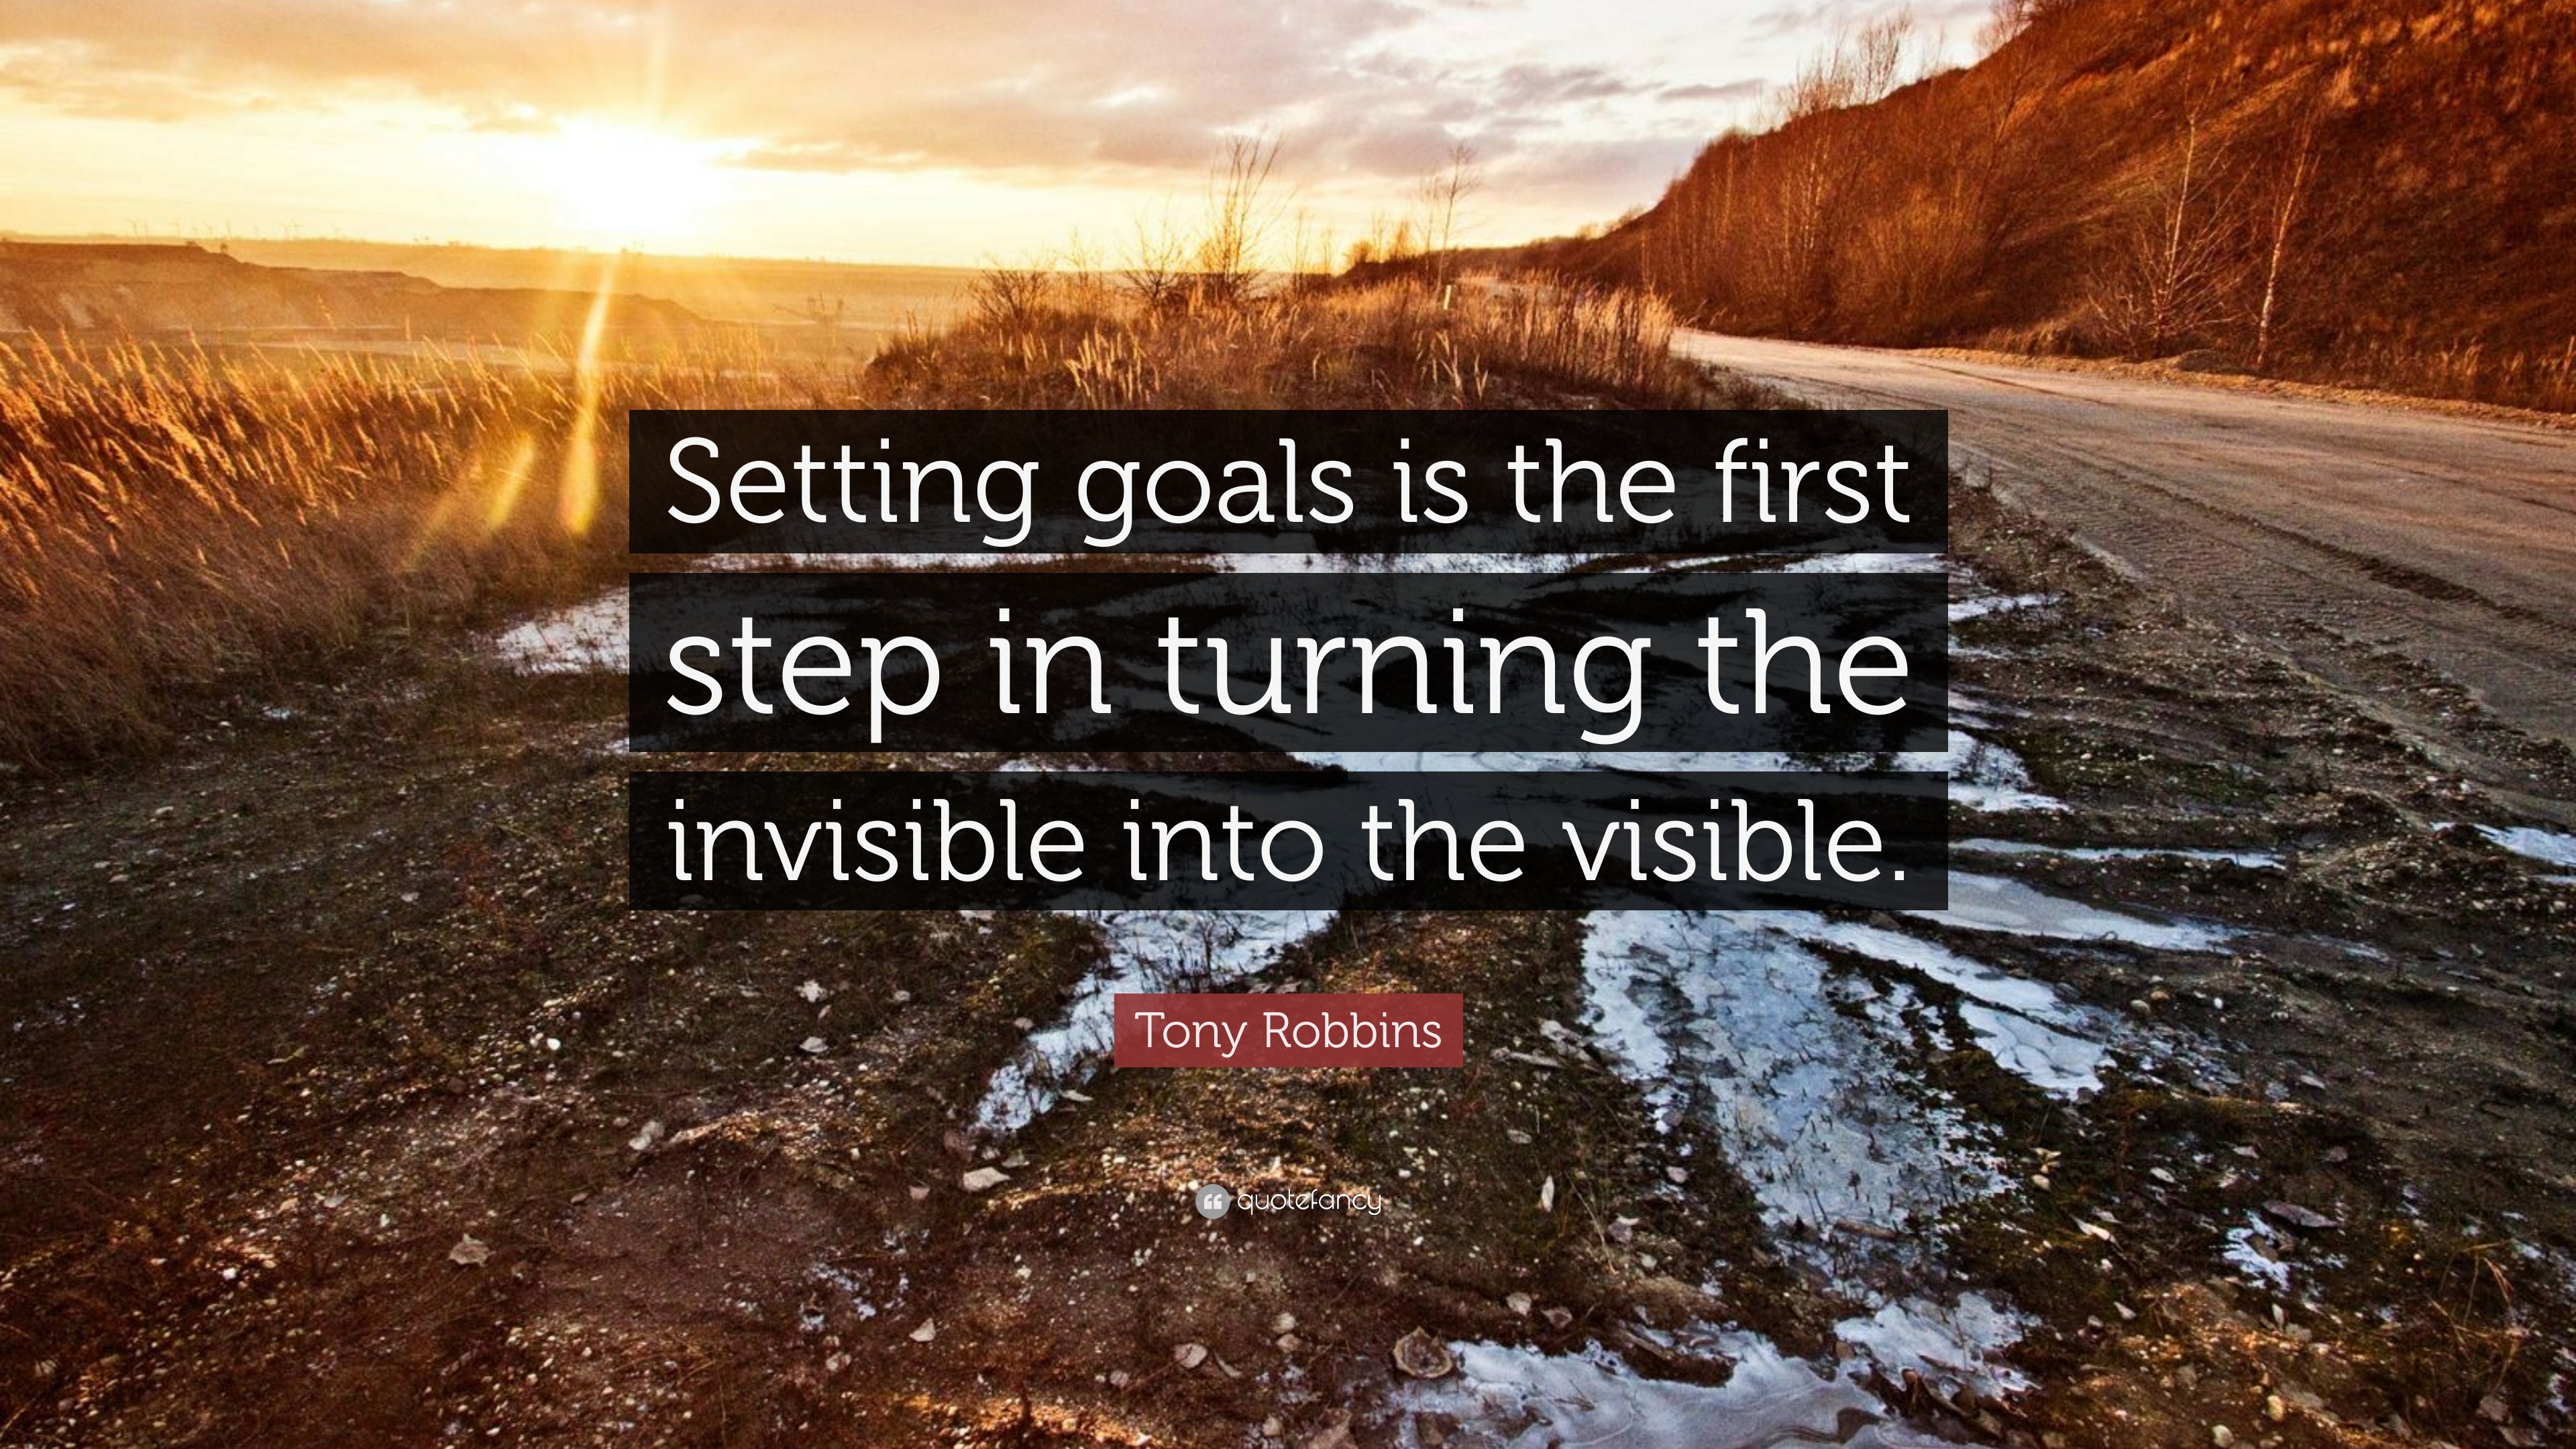 Tony Robbins Quote: “Setting goals is the first step in turning the